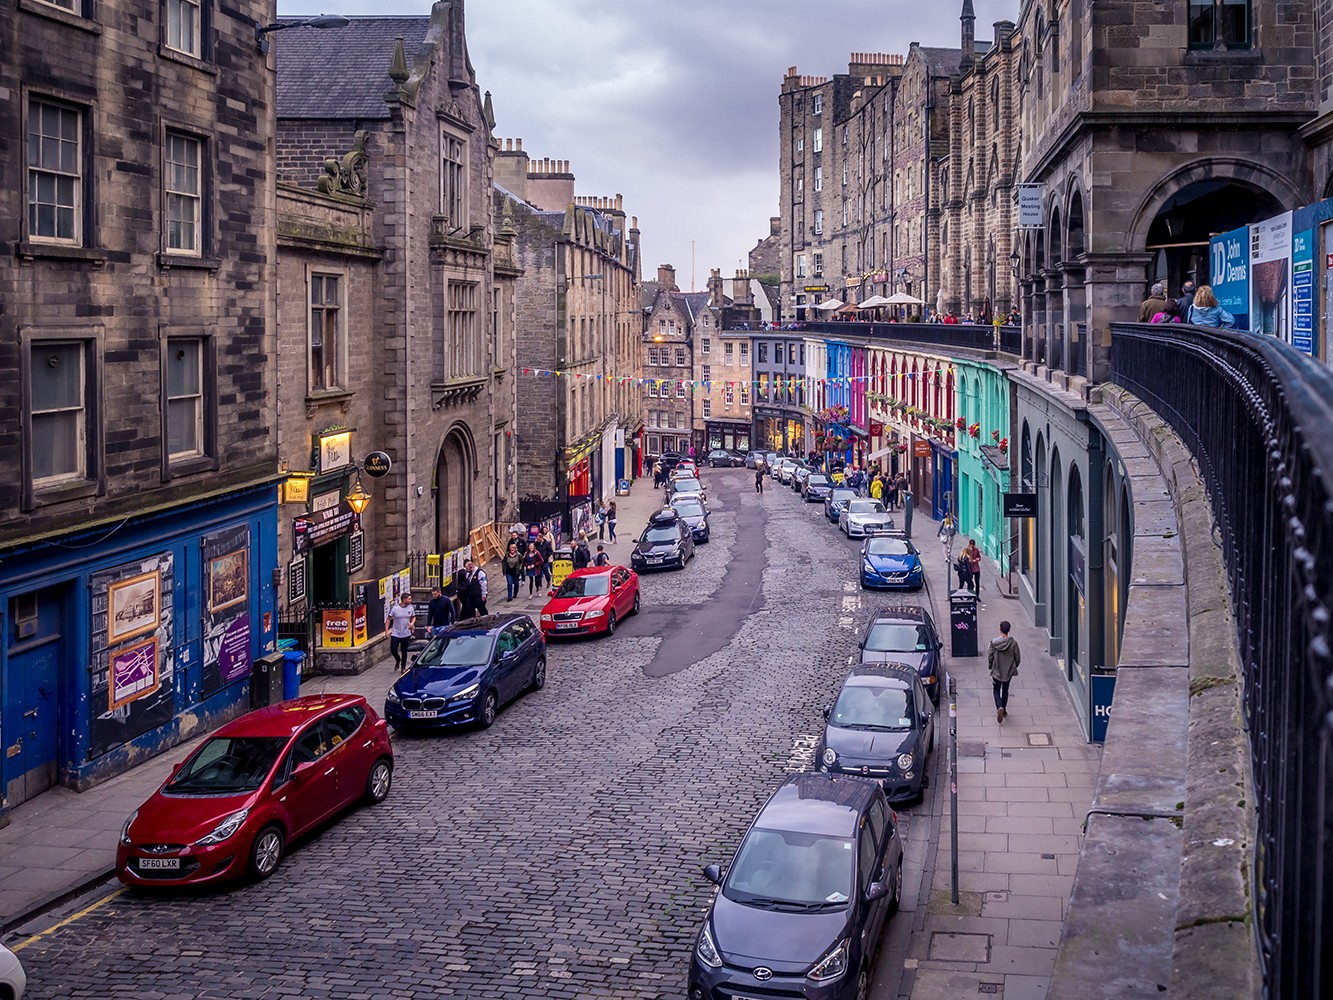 Best places to take Instagram photos in Edinburgh Scotland by travel blogger My Beauty Bunny - Best Photo Spots in Edinburgh that are Instagram Friendly featured by popular Los Angeles travel blogger, My Beauty Bunny